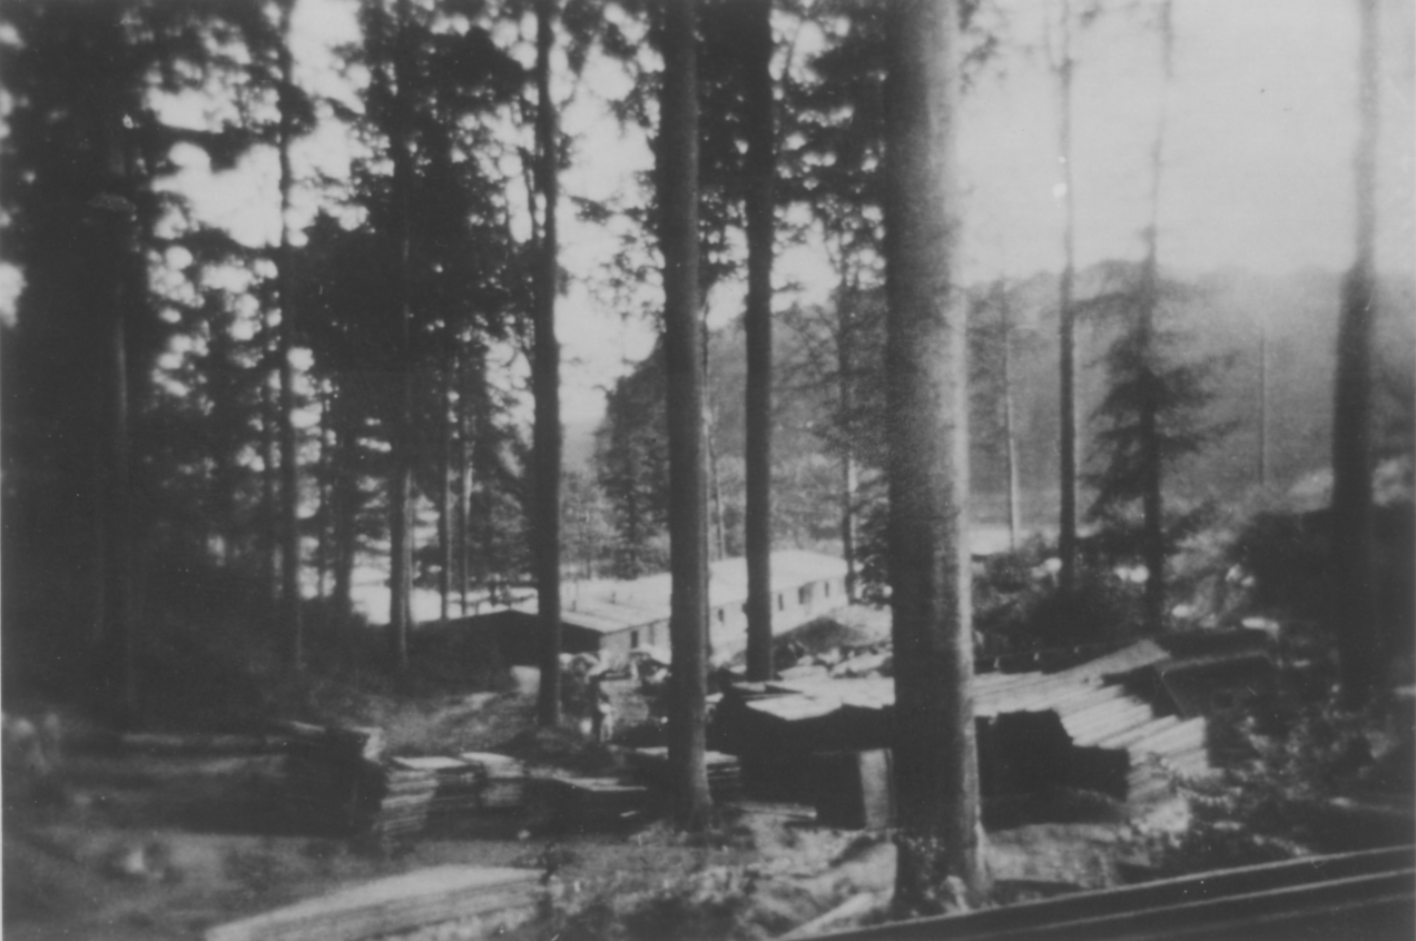 You can see stacks of wooden boards lying under trees. In the background you can see an elongated, half-built barrack.